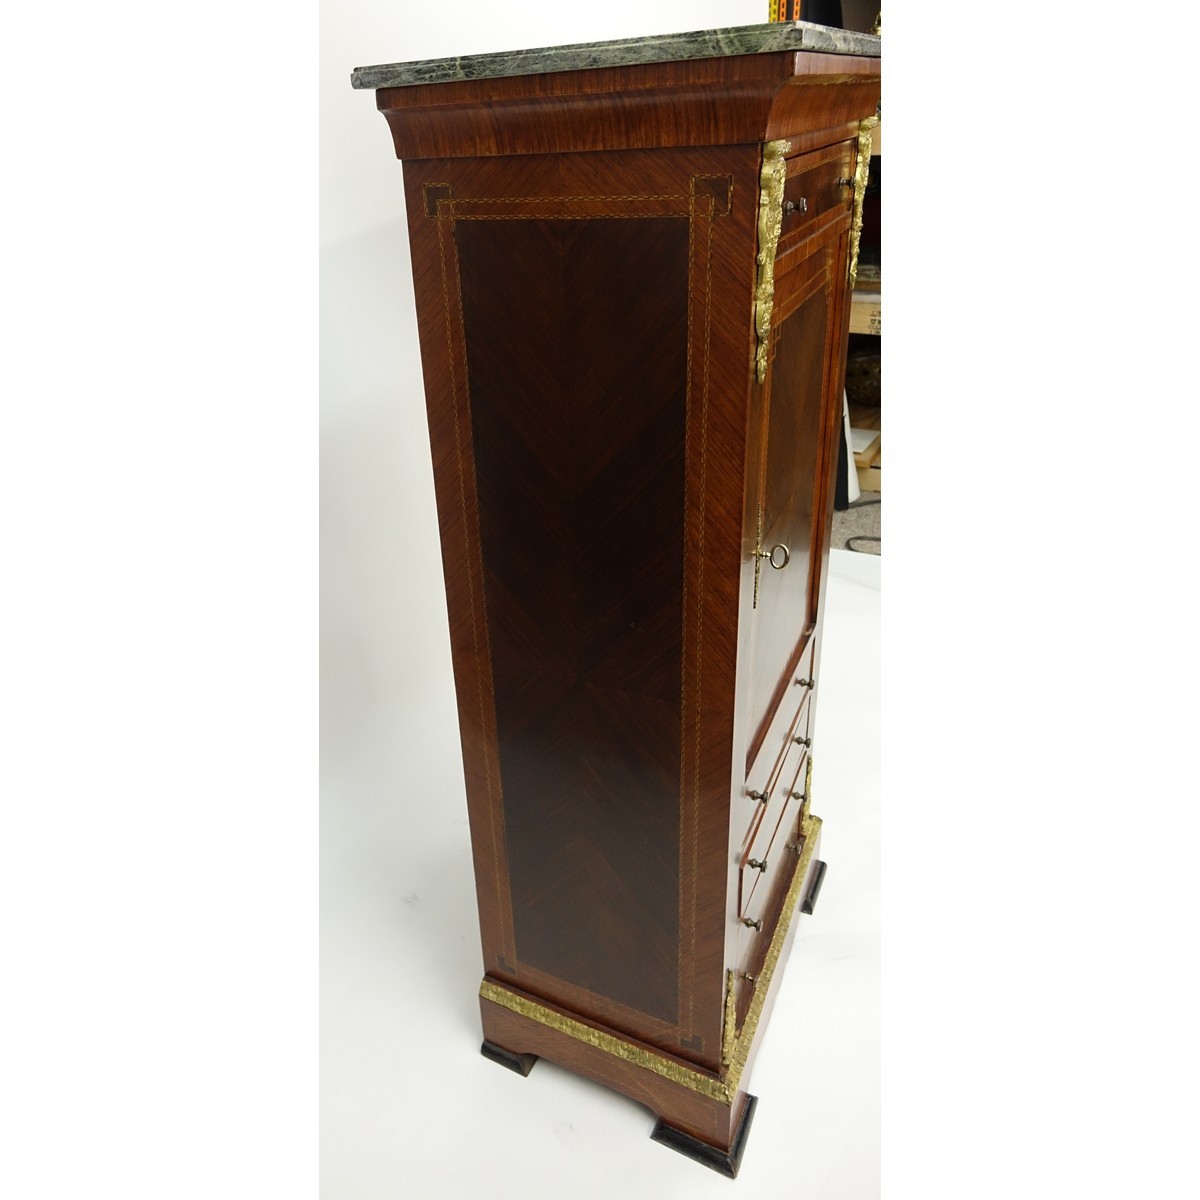 Tall Mid Century Louis XVI Style Gilt Brass Inlaid Secretary Desk with Marble Top. Large center door with four sliding doors, key included.